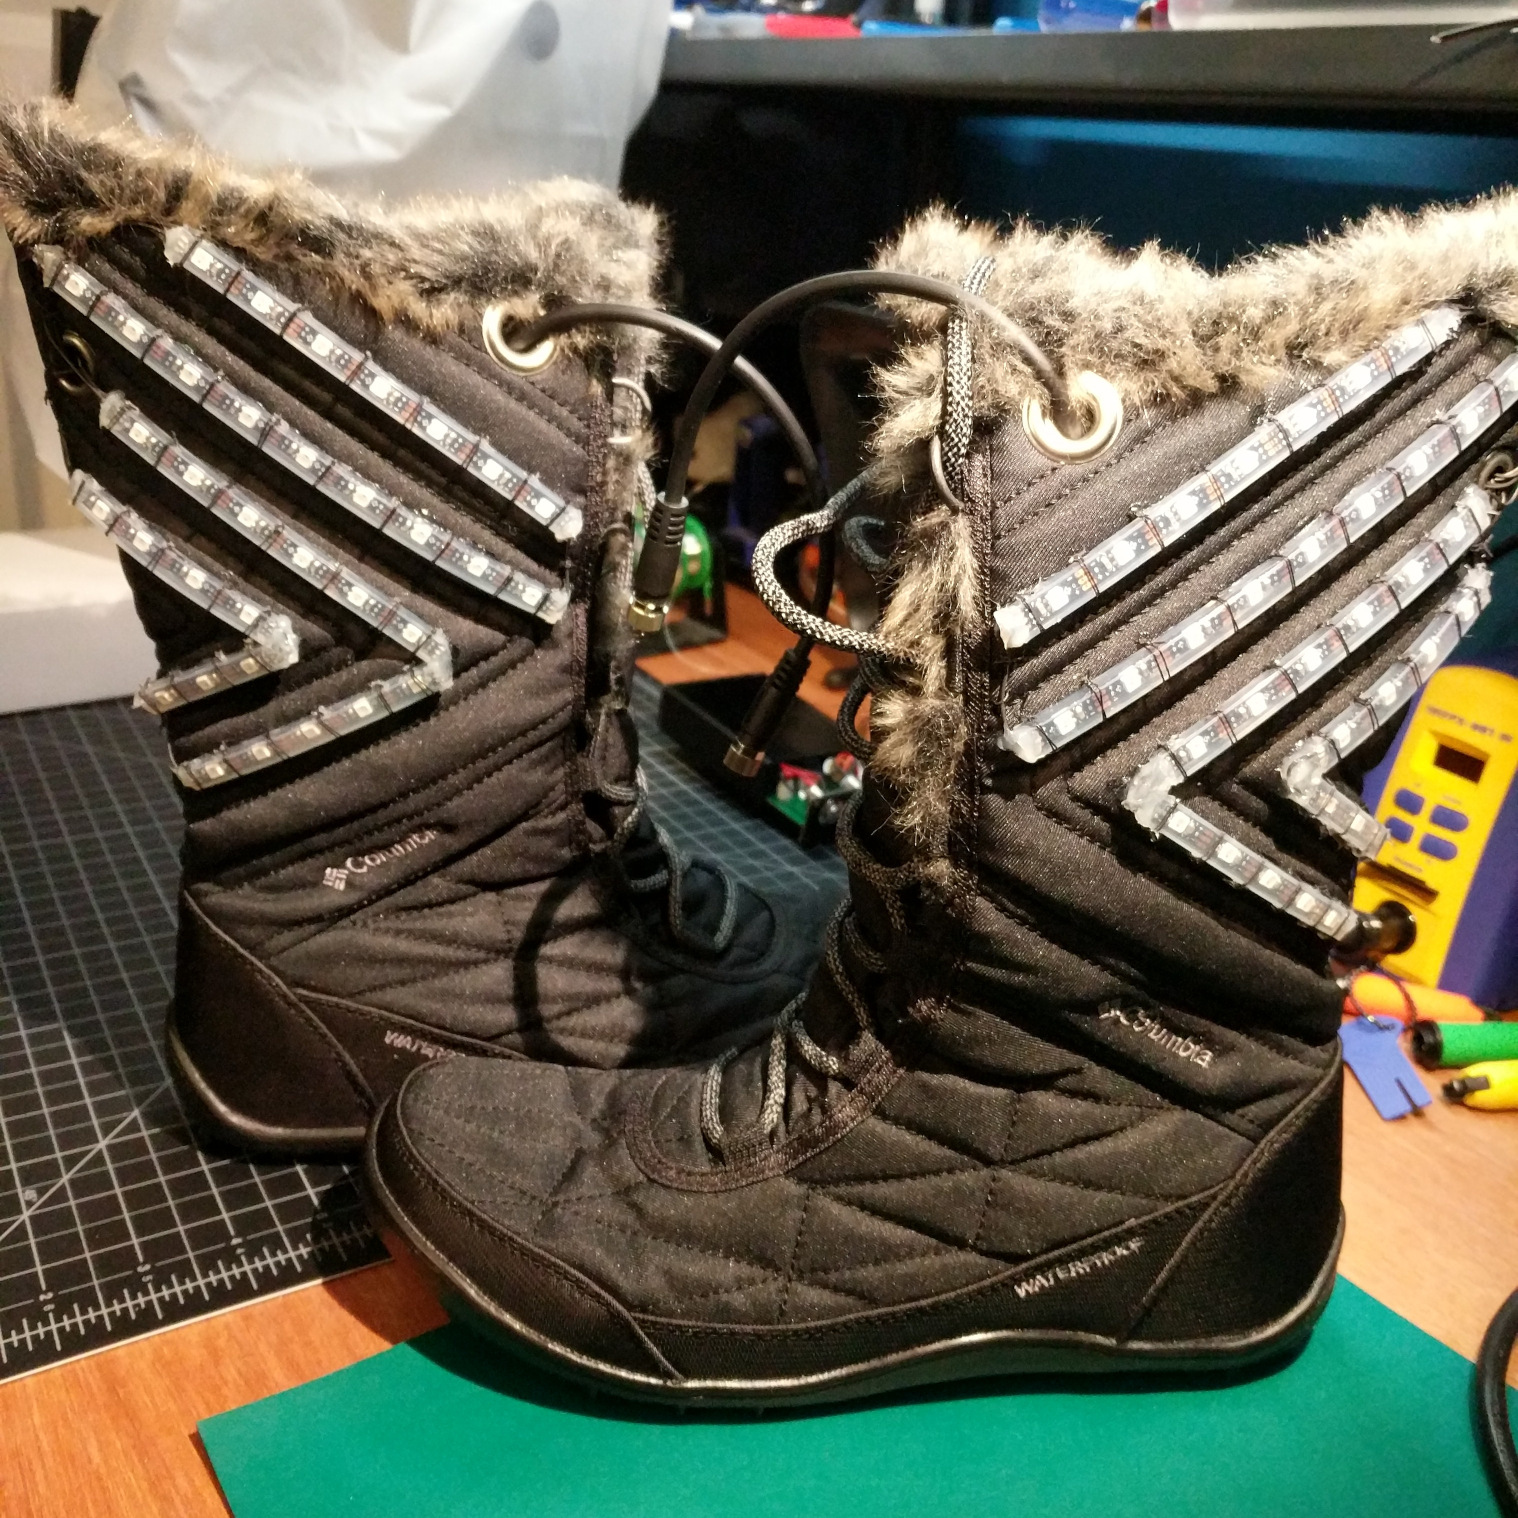 A pair of boots with LEDs and enclosures mounted